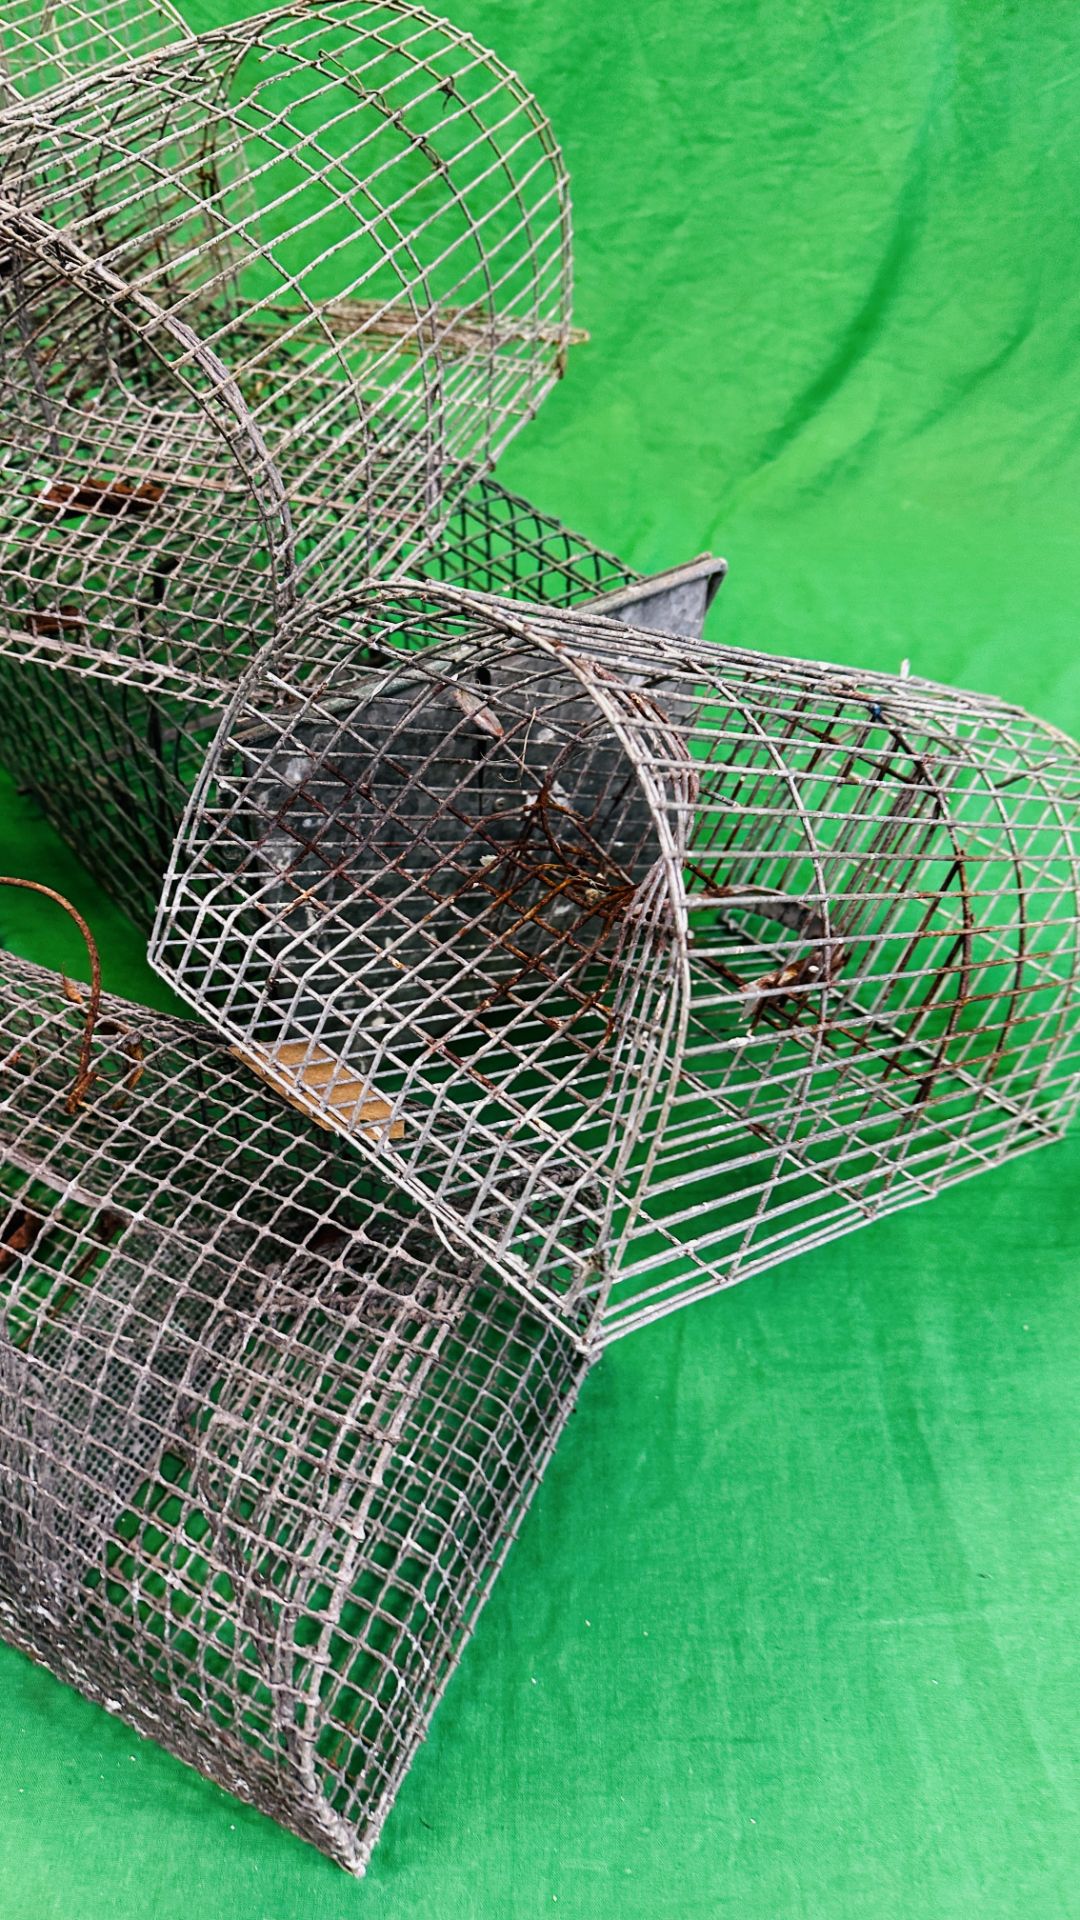 A GROUP OF FIVE HUMANE TRAPS - Image 3 of 8